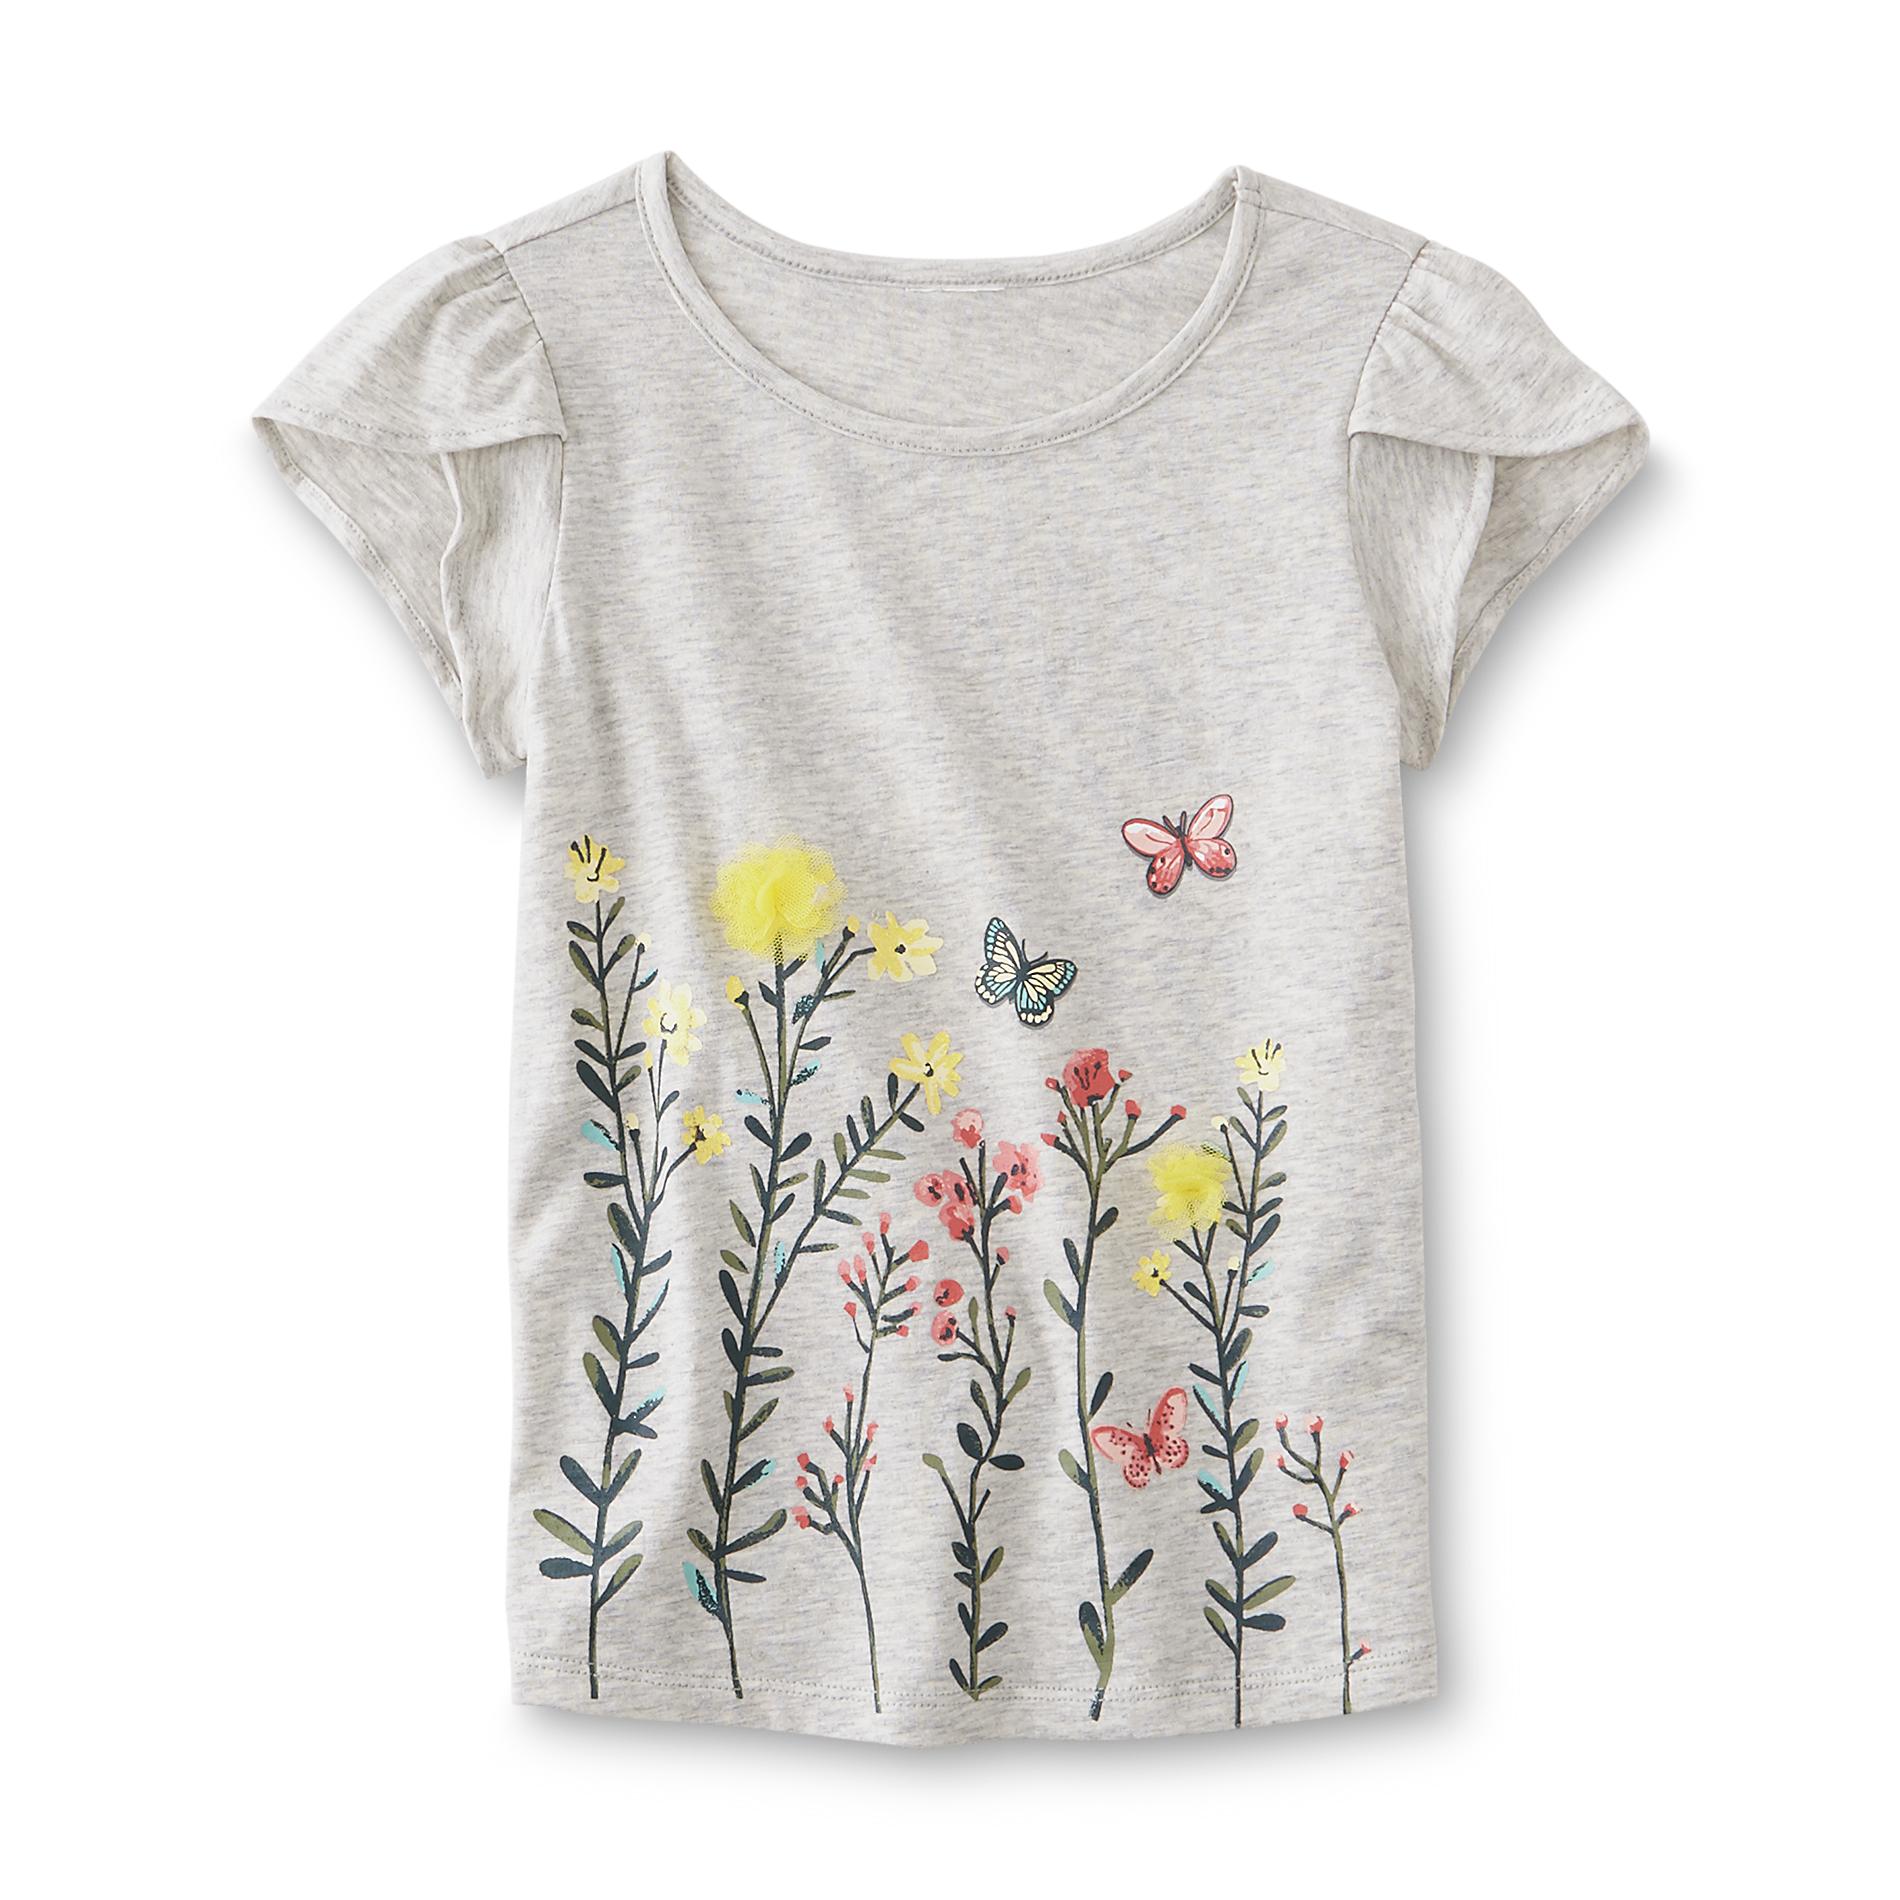 Girl's Tulip Sleeve Top - Floral